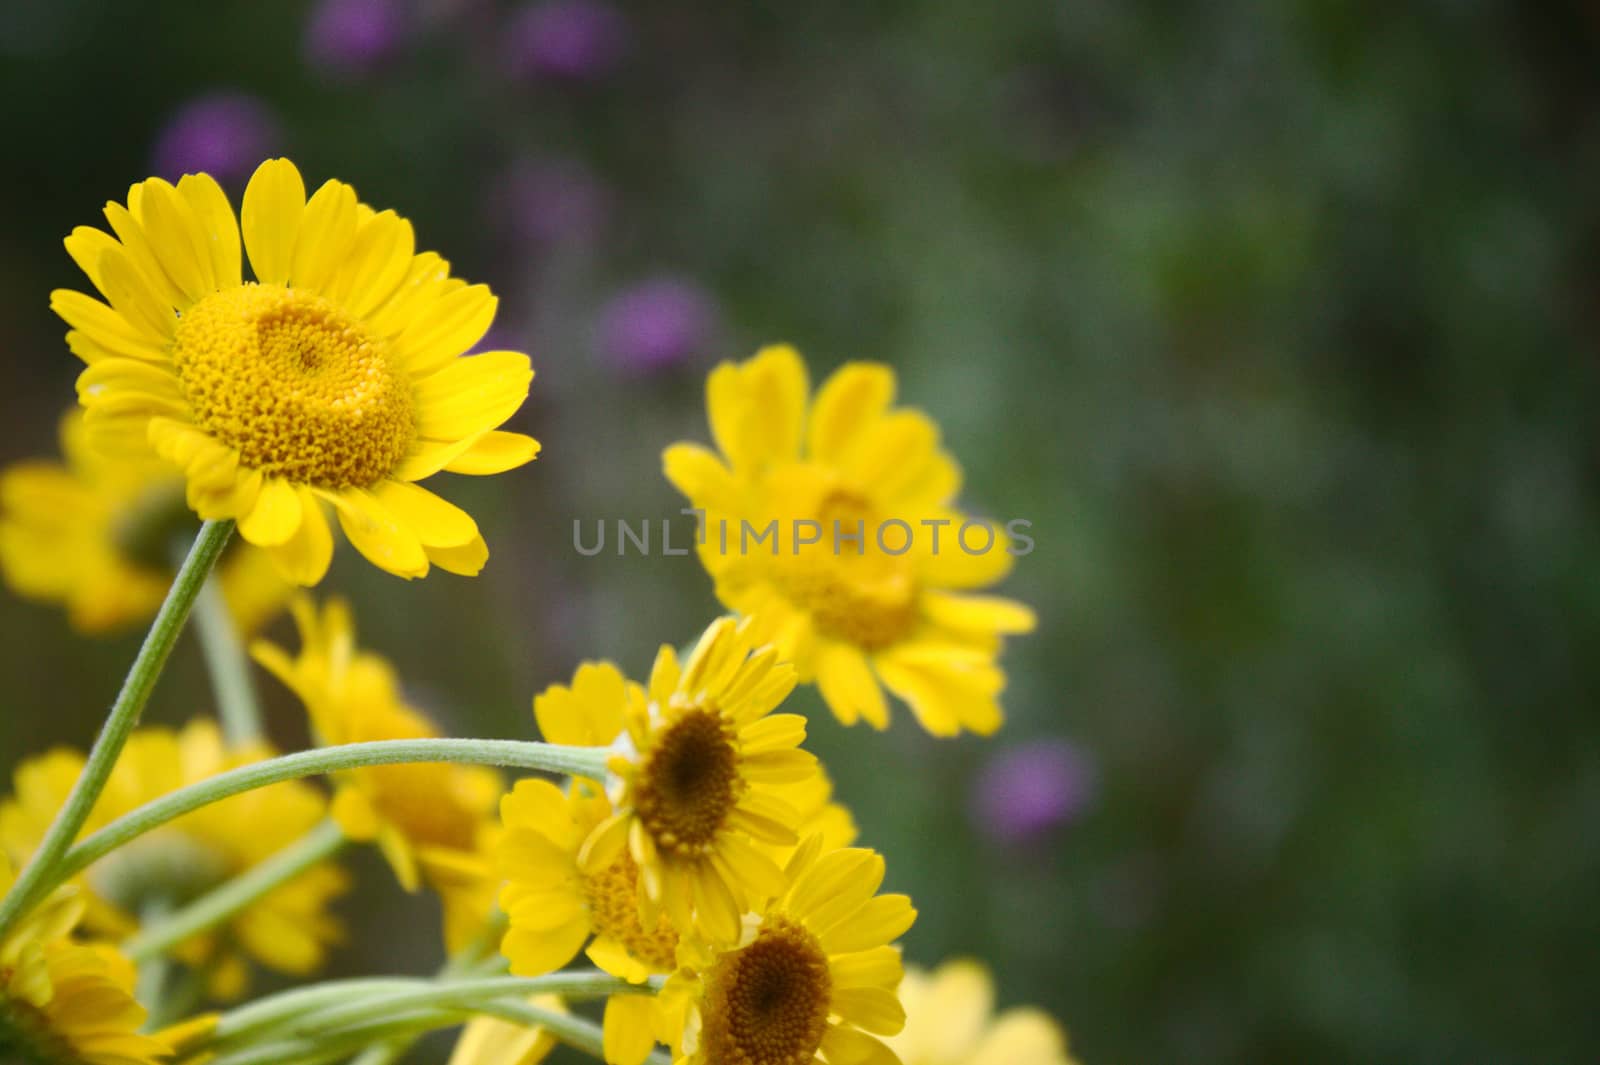 The picture shows yellow flowers in the garden